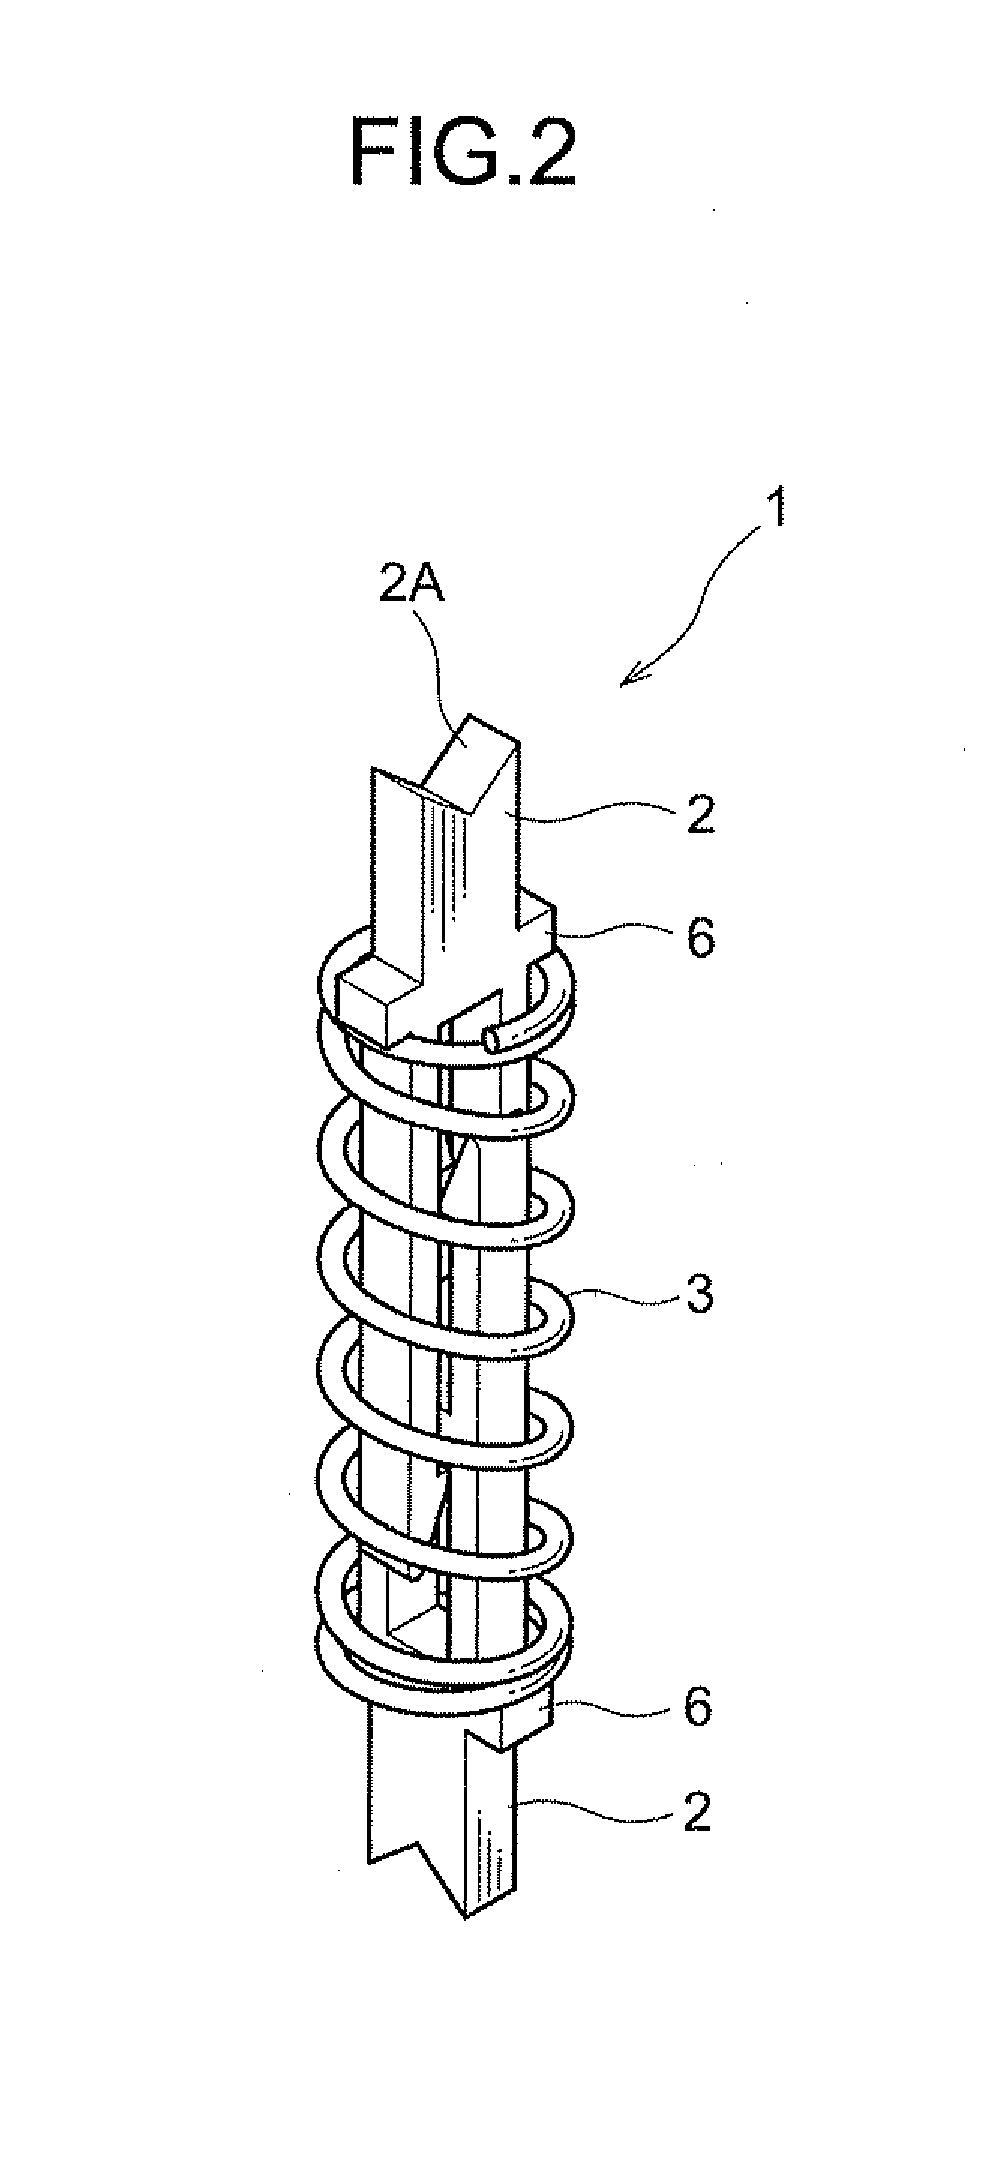 Contact and electrical connecting apparatus